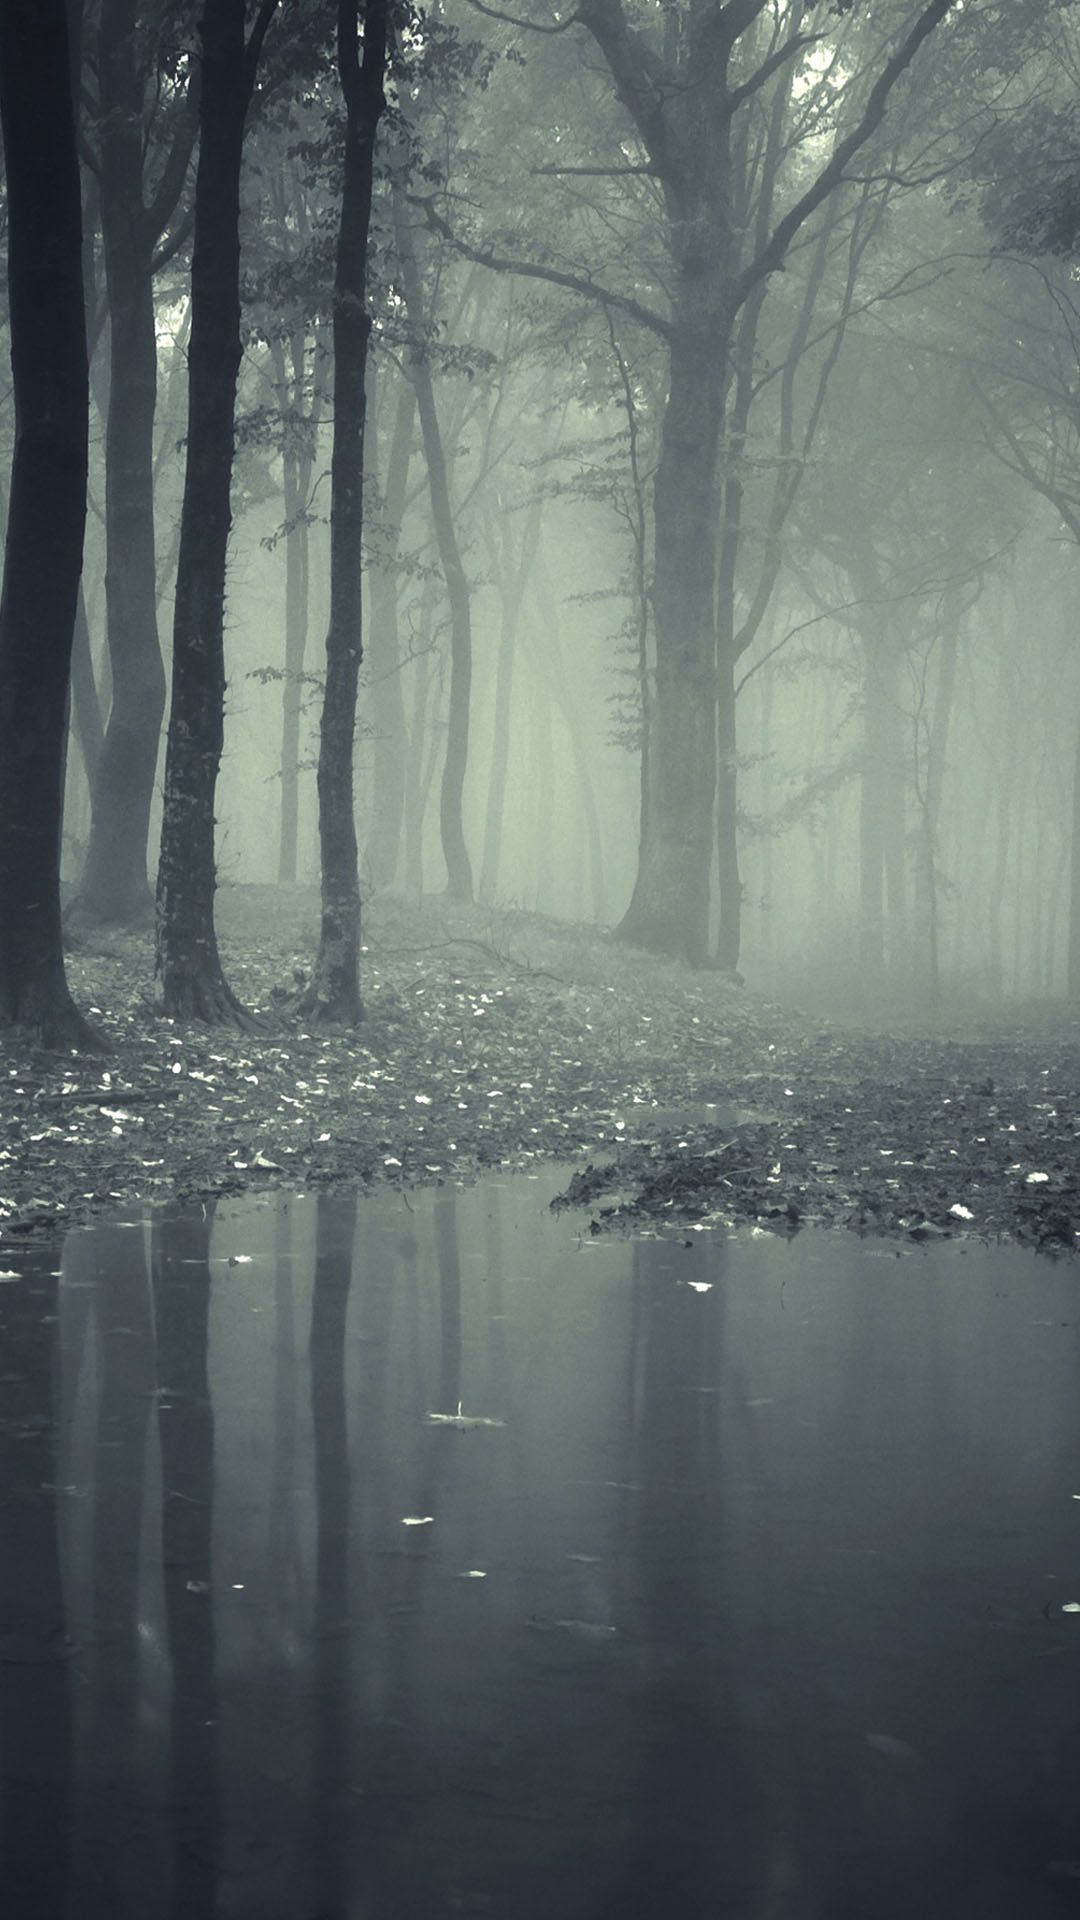 Horror Misty Dark Forest Android Wallpaper free download